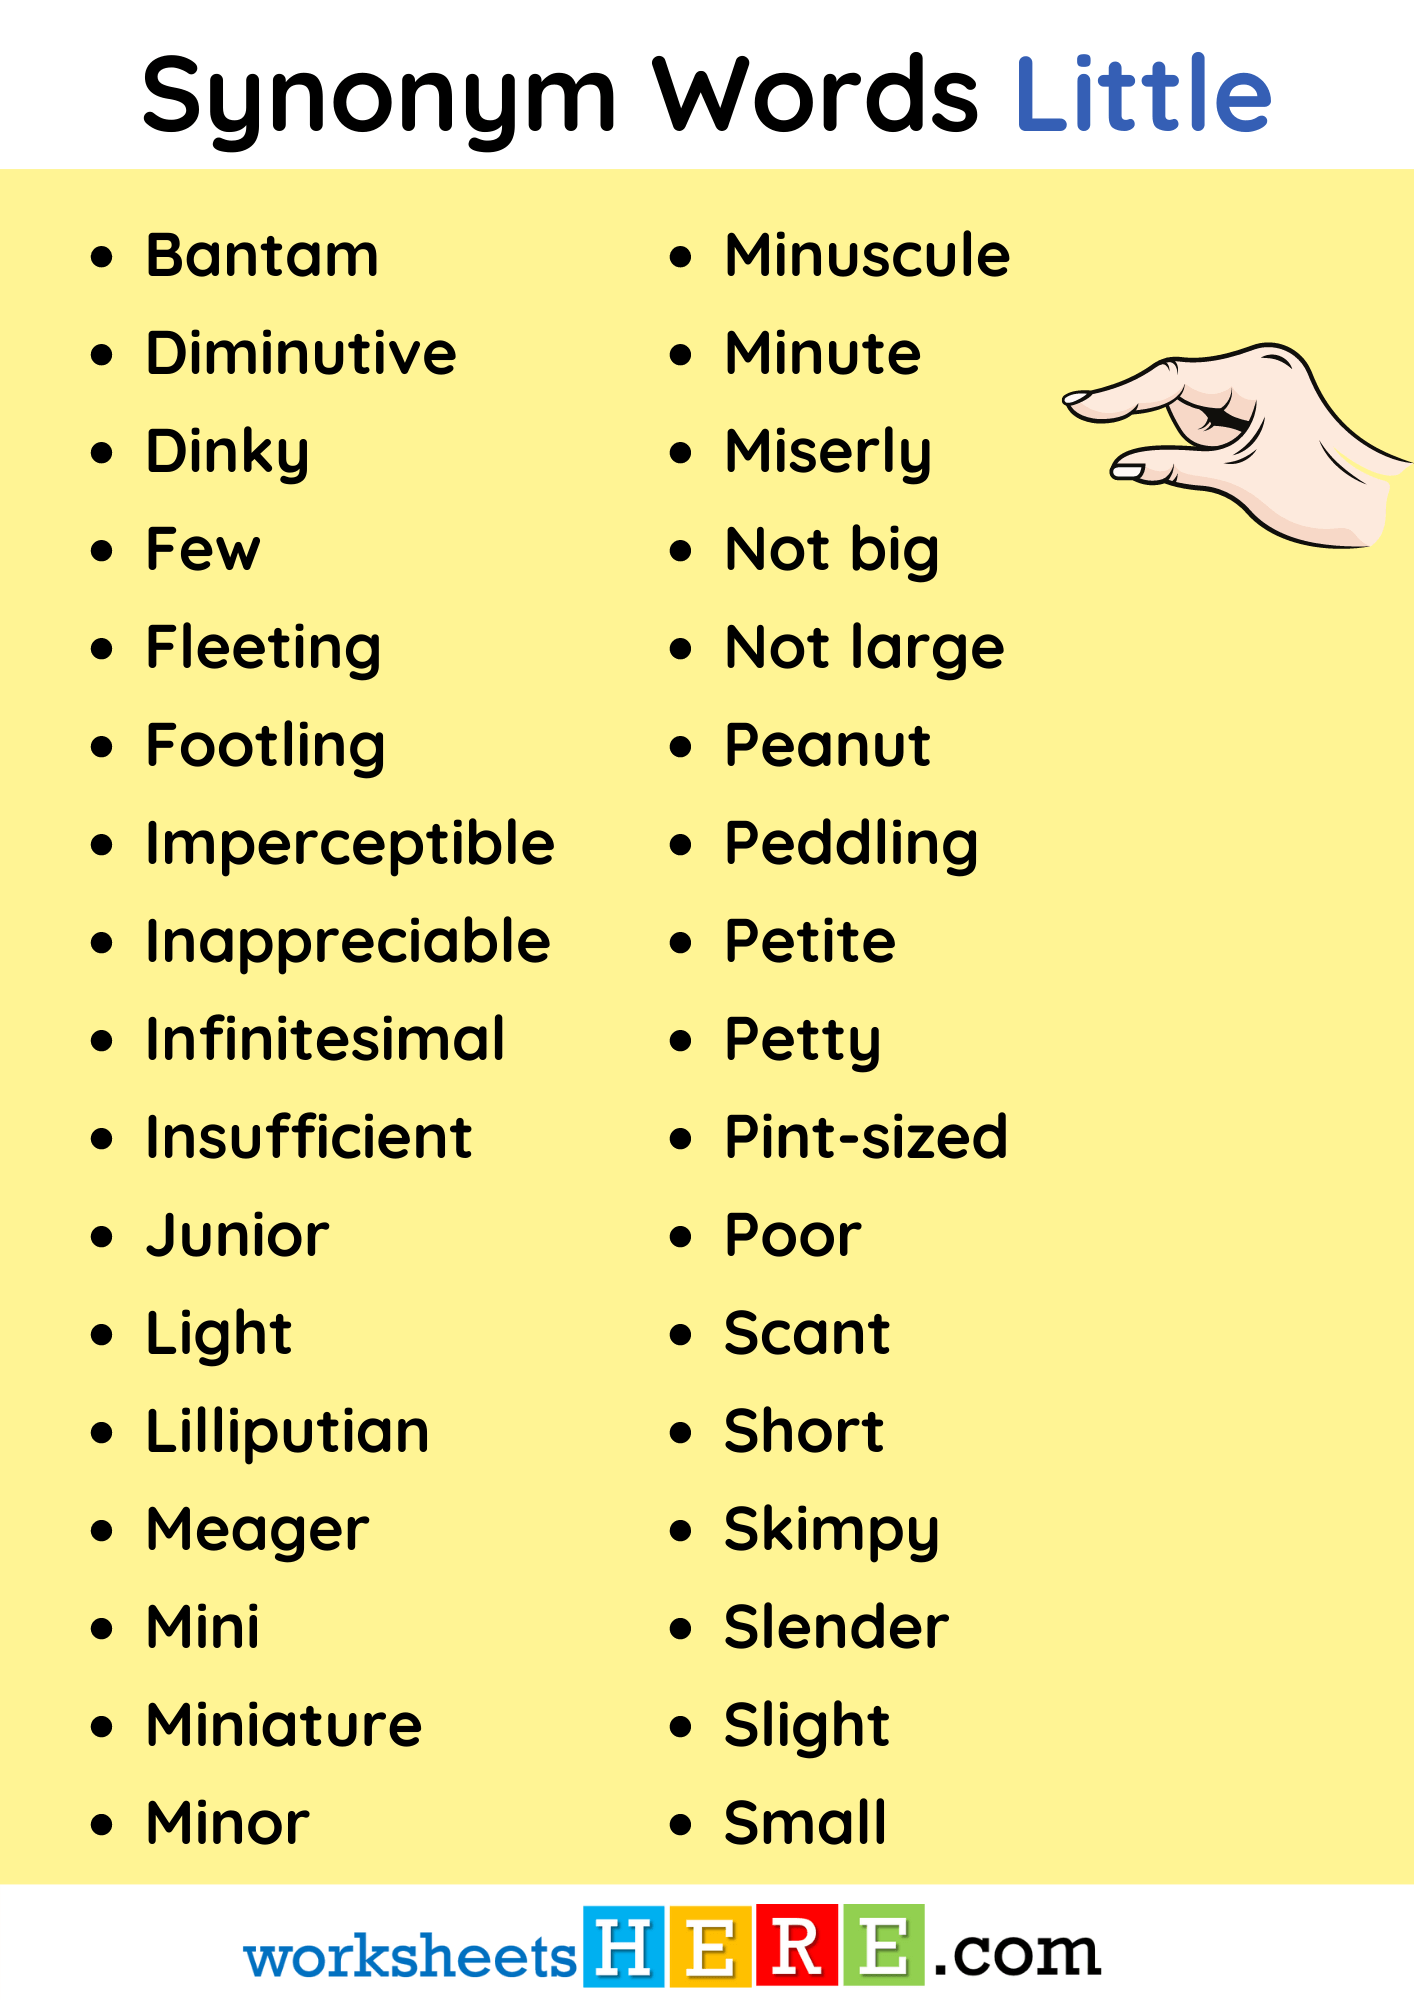 Synonym Words List with LITTLE in English PDF Worksheet For Students